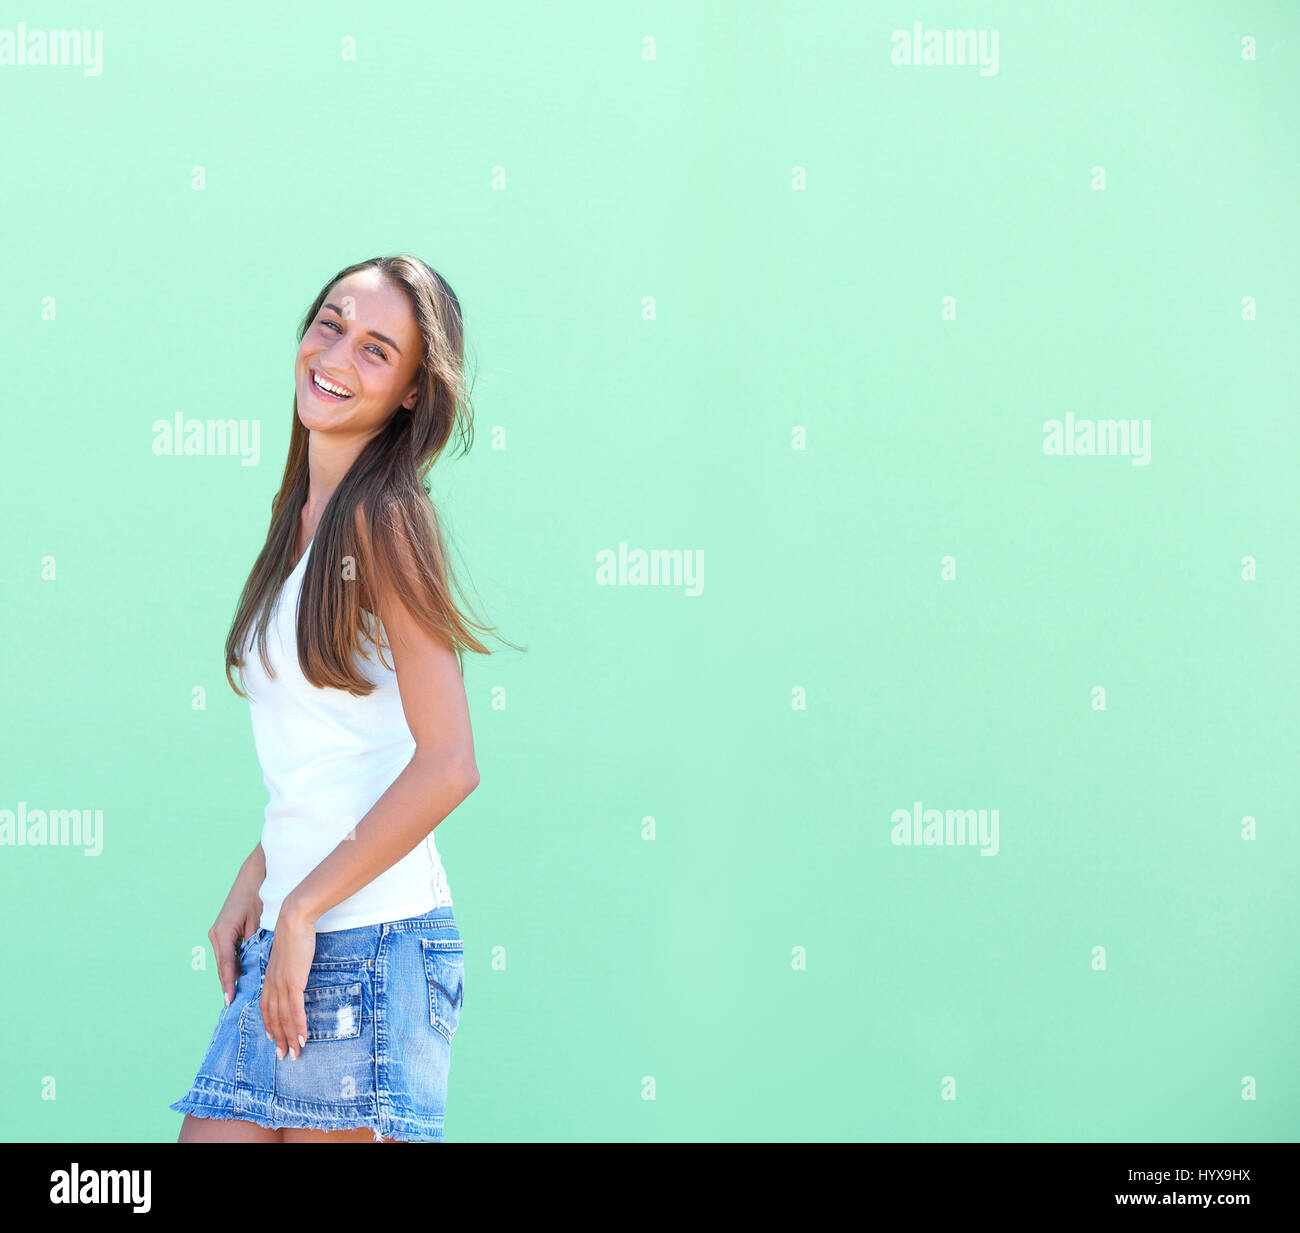 Side view portrait of a cute girl smiling against green background Stock Photo